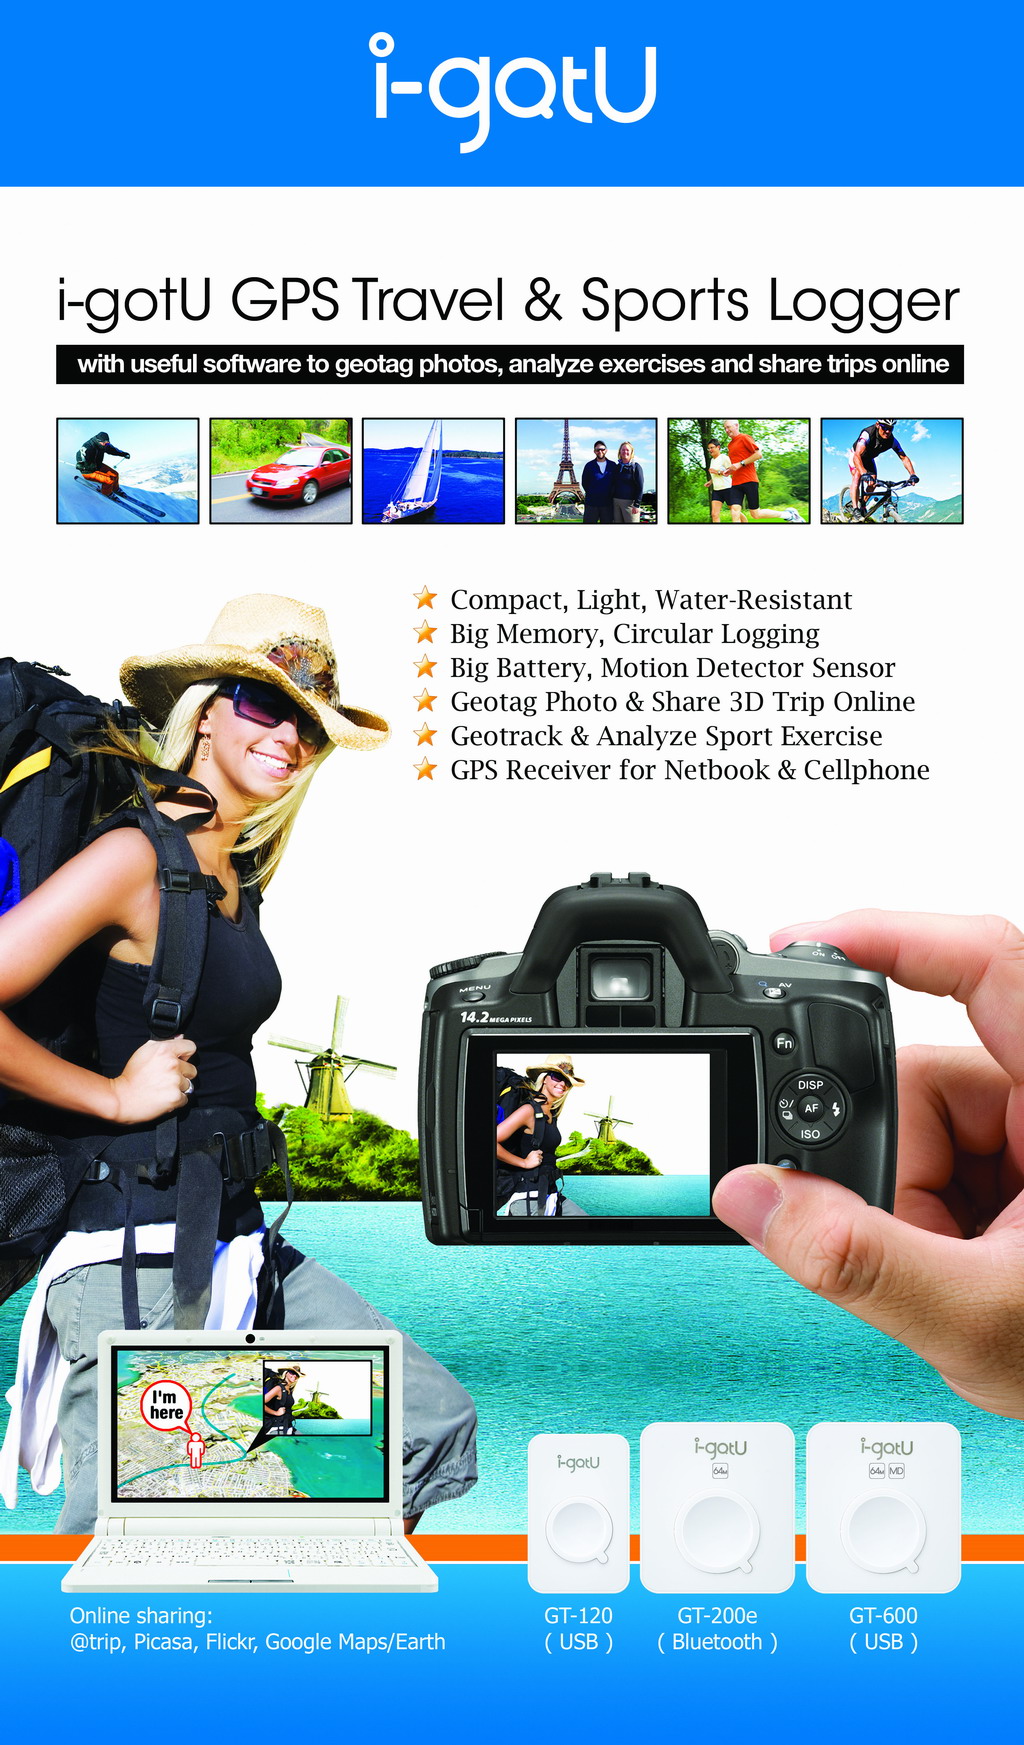 I Gotu Suite 3 0 A Complete Gps Software Suite For Travel Sports And Tour Guide